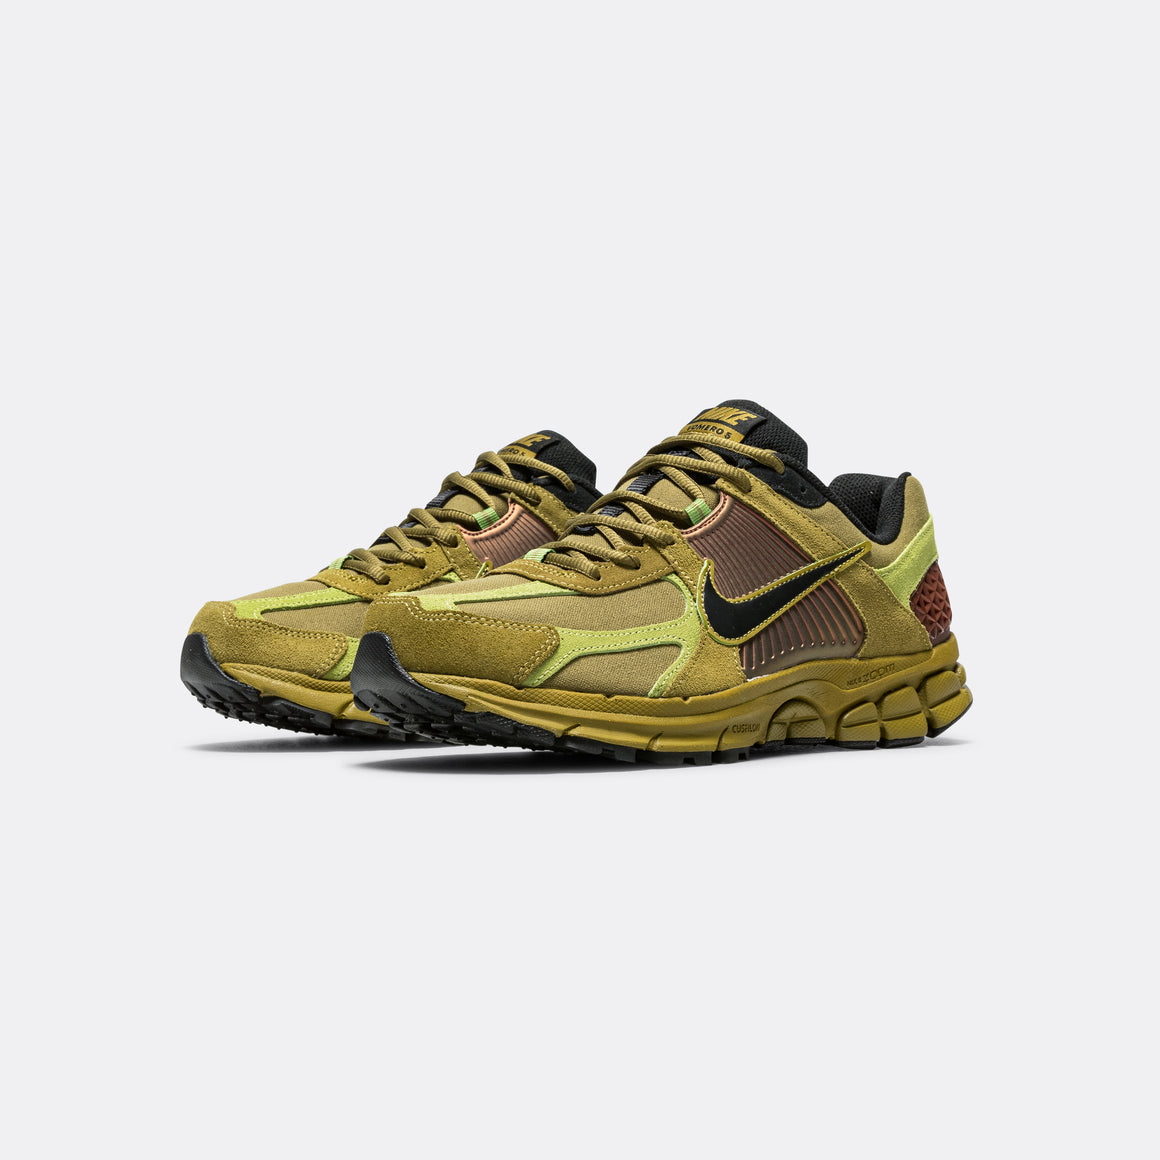 Nike - Zoom Vomero 5 - Pacific Moss/Black-Pear - UP THERE